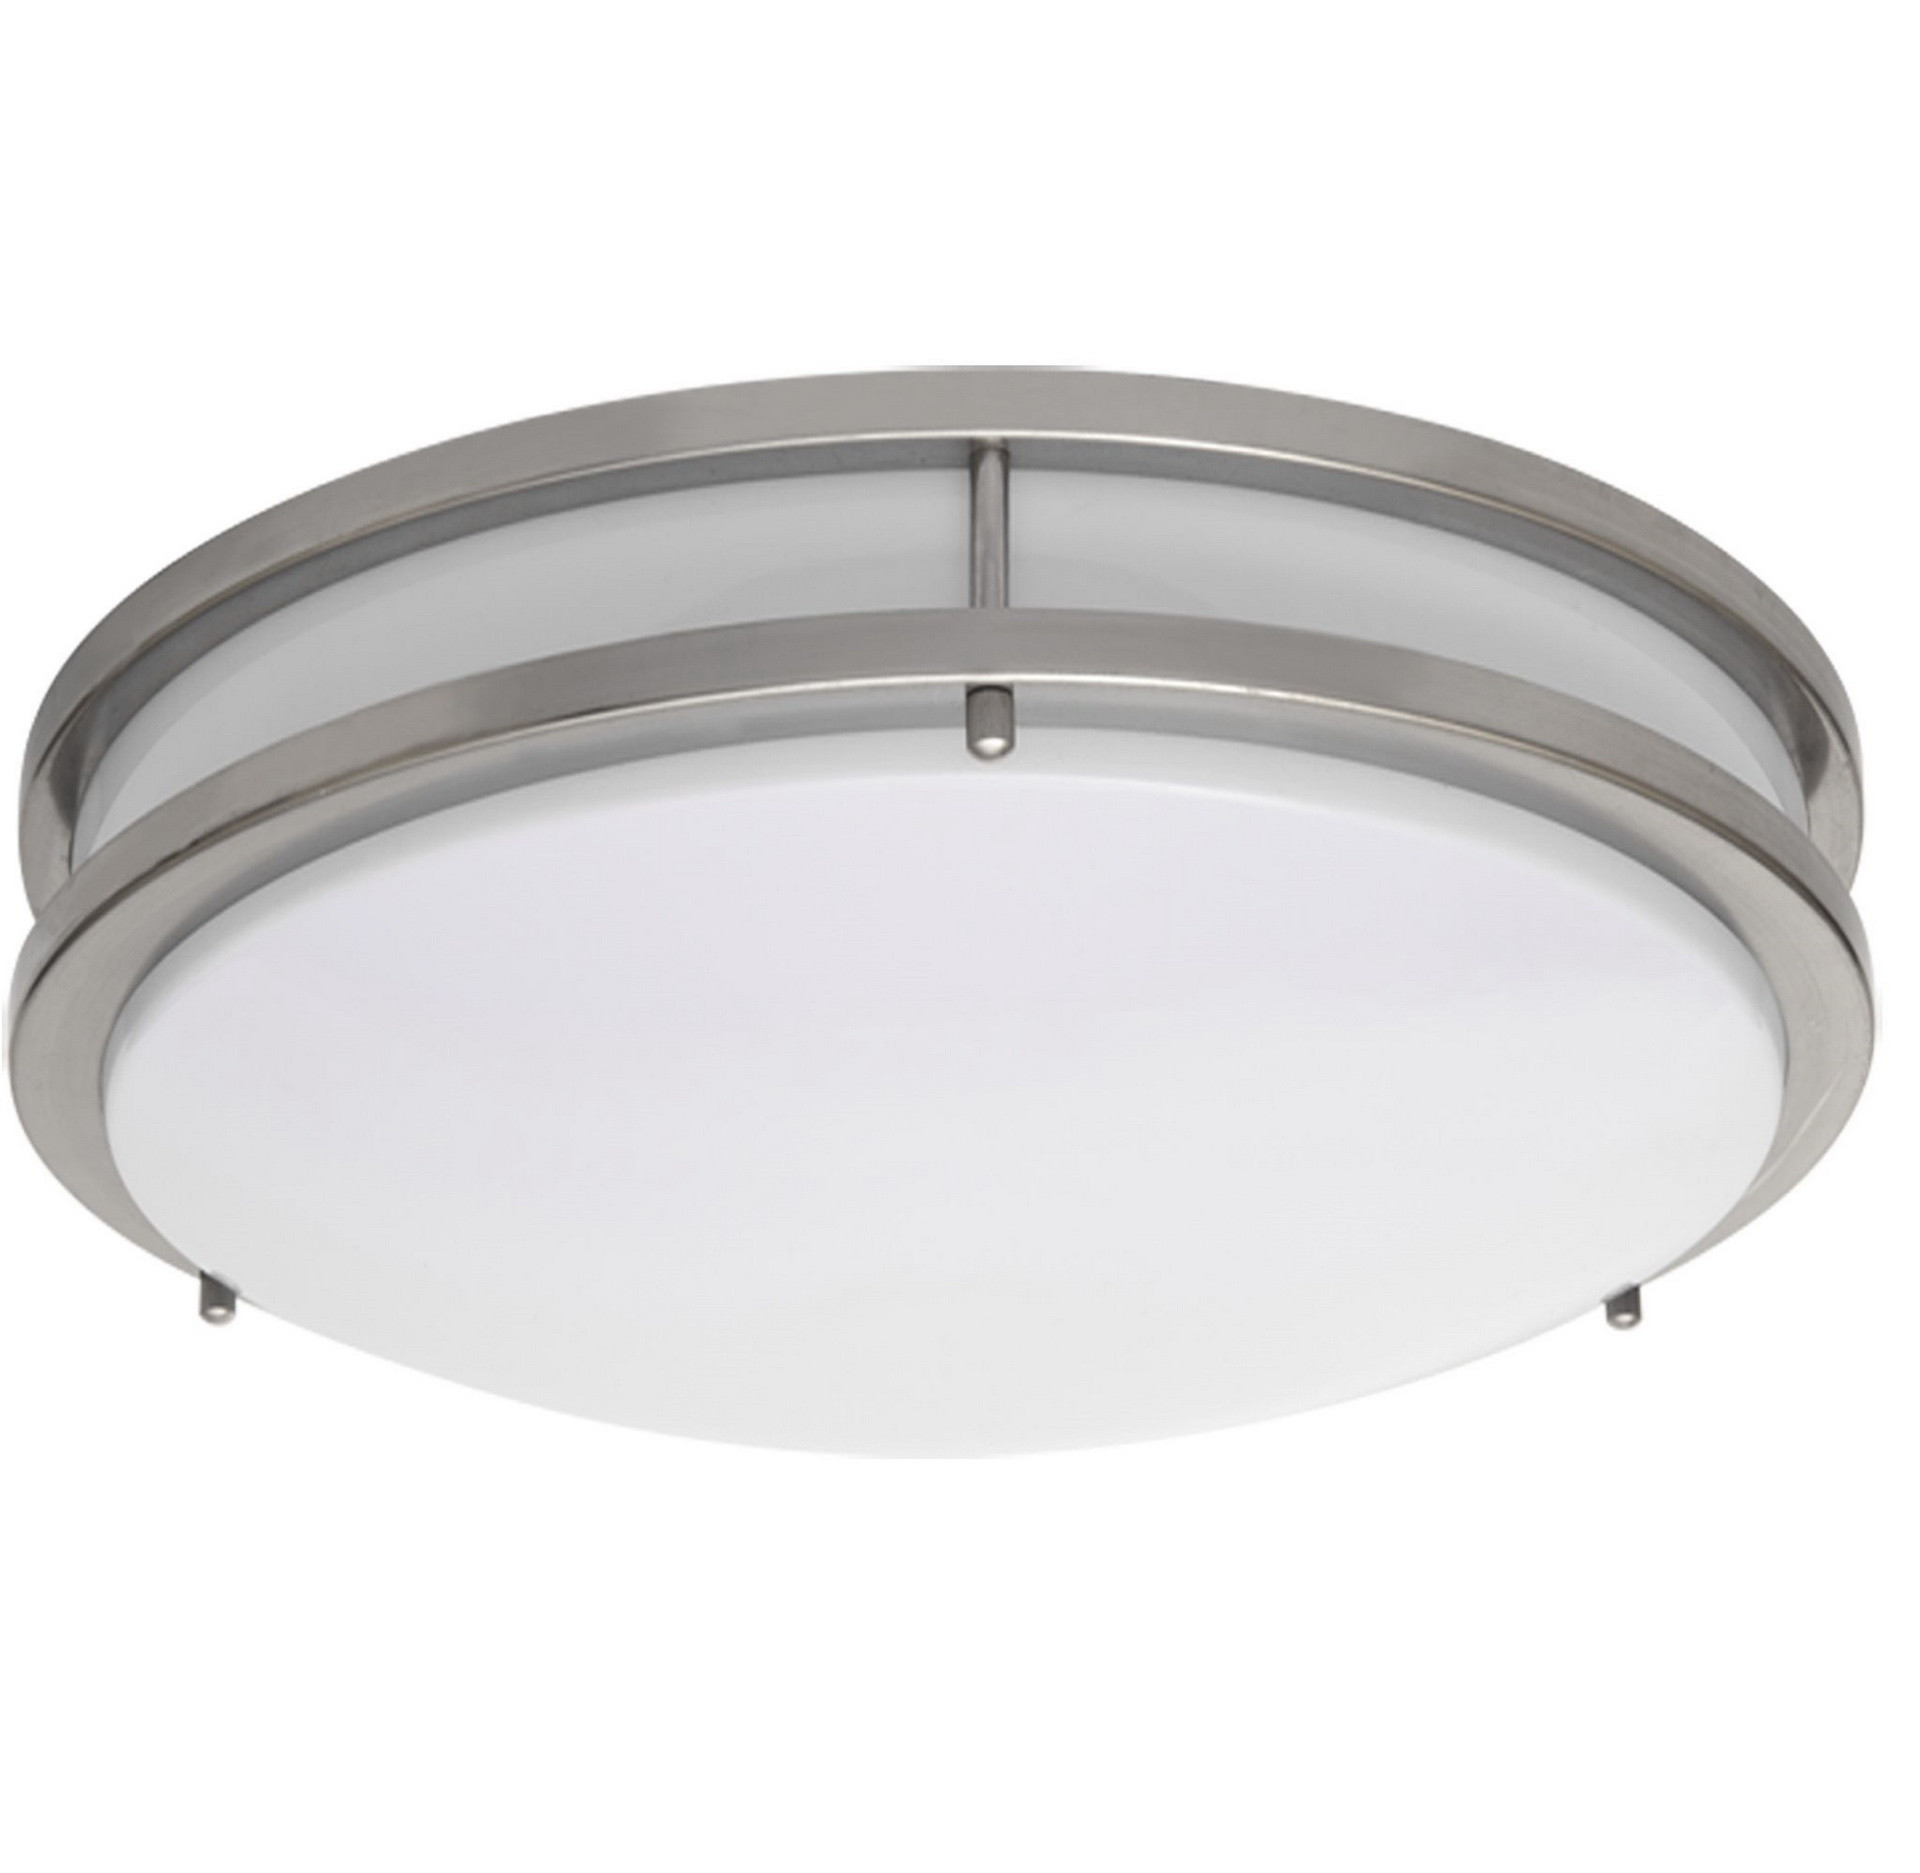 Home Depot Light Fixtures Bedroom
 Ceiling lamps home depot perfectly fits with any home